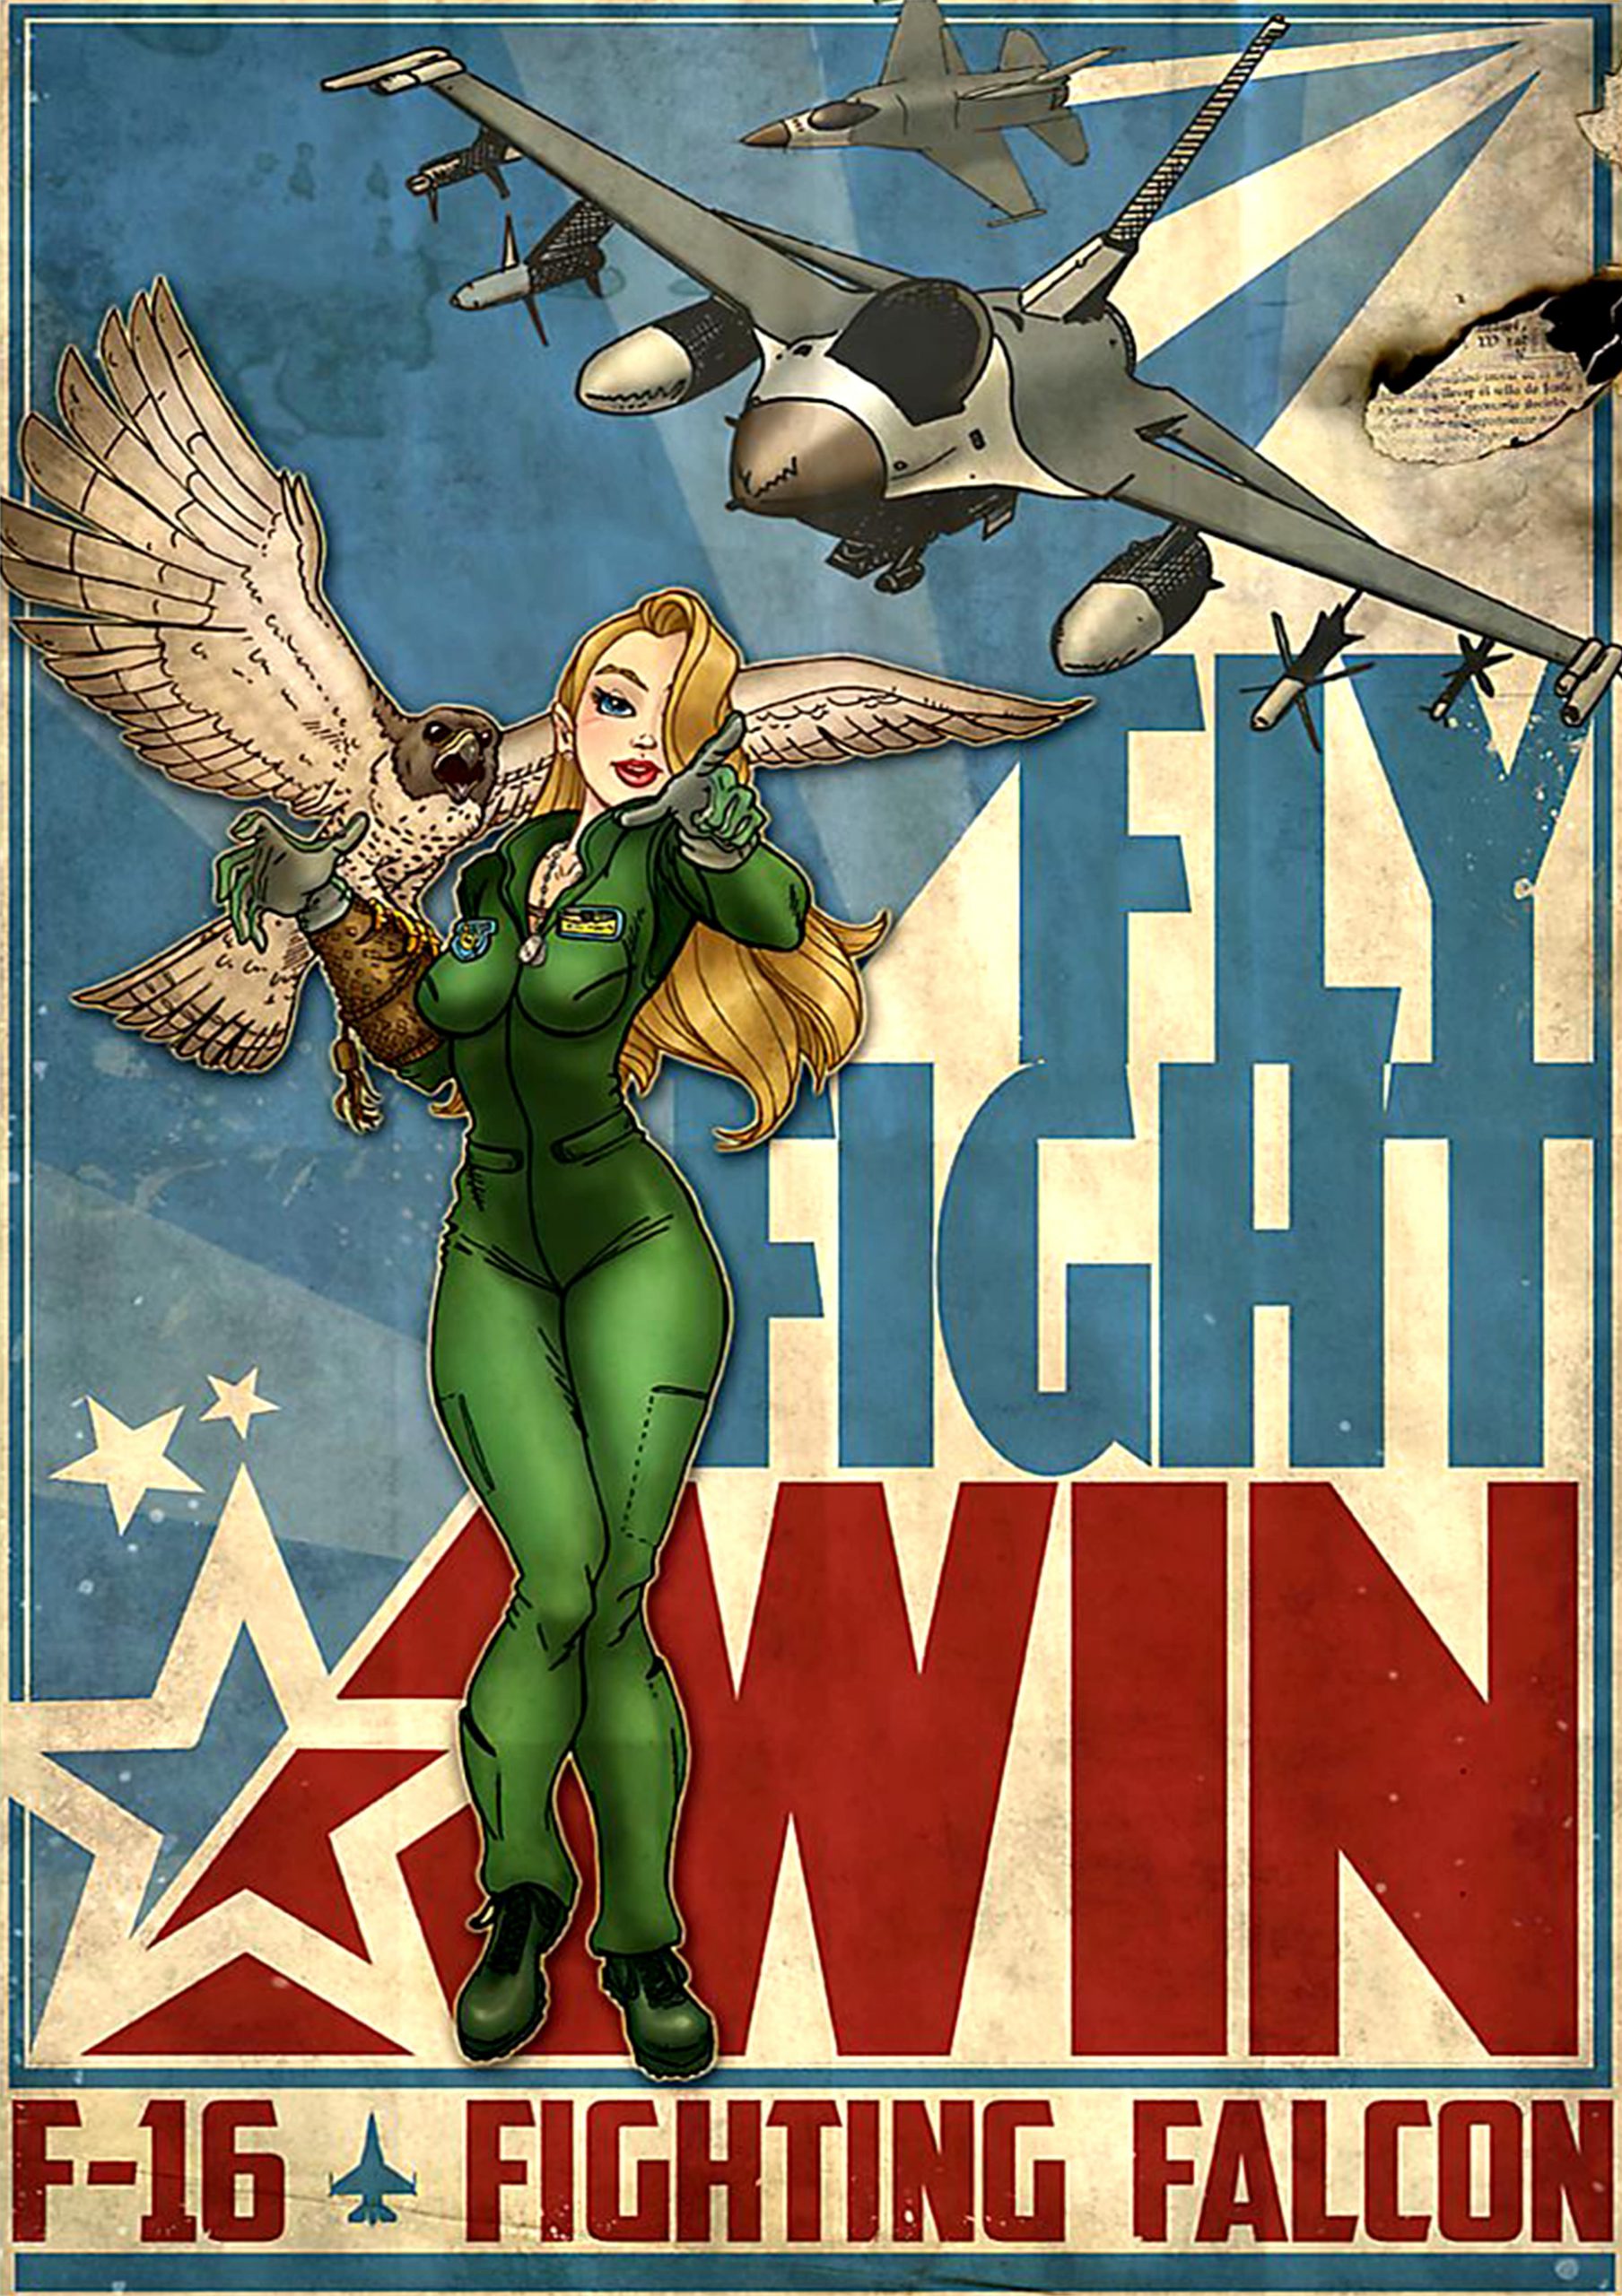 vintage fly fight win f-16 fighting falcon poster 1